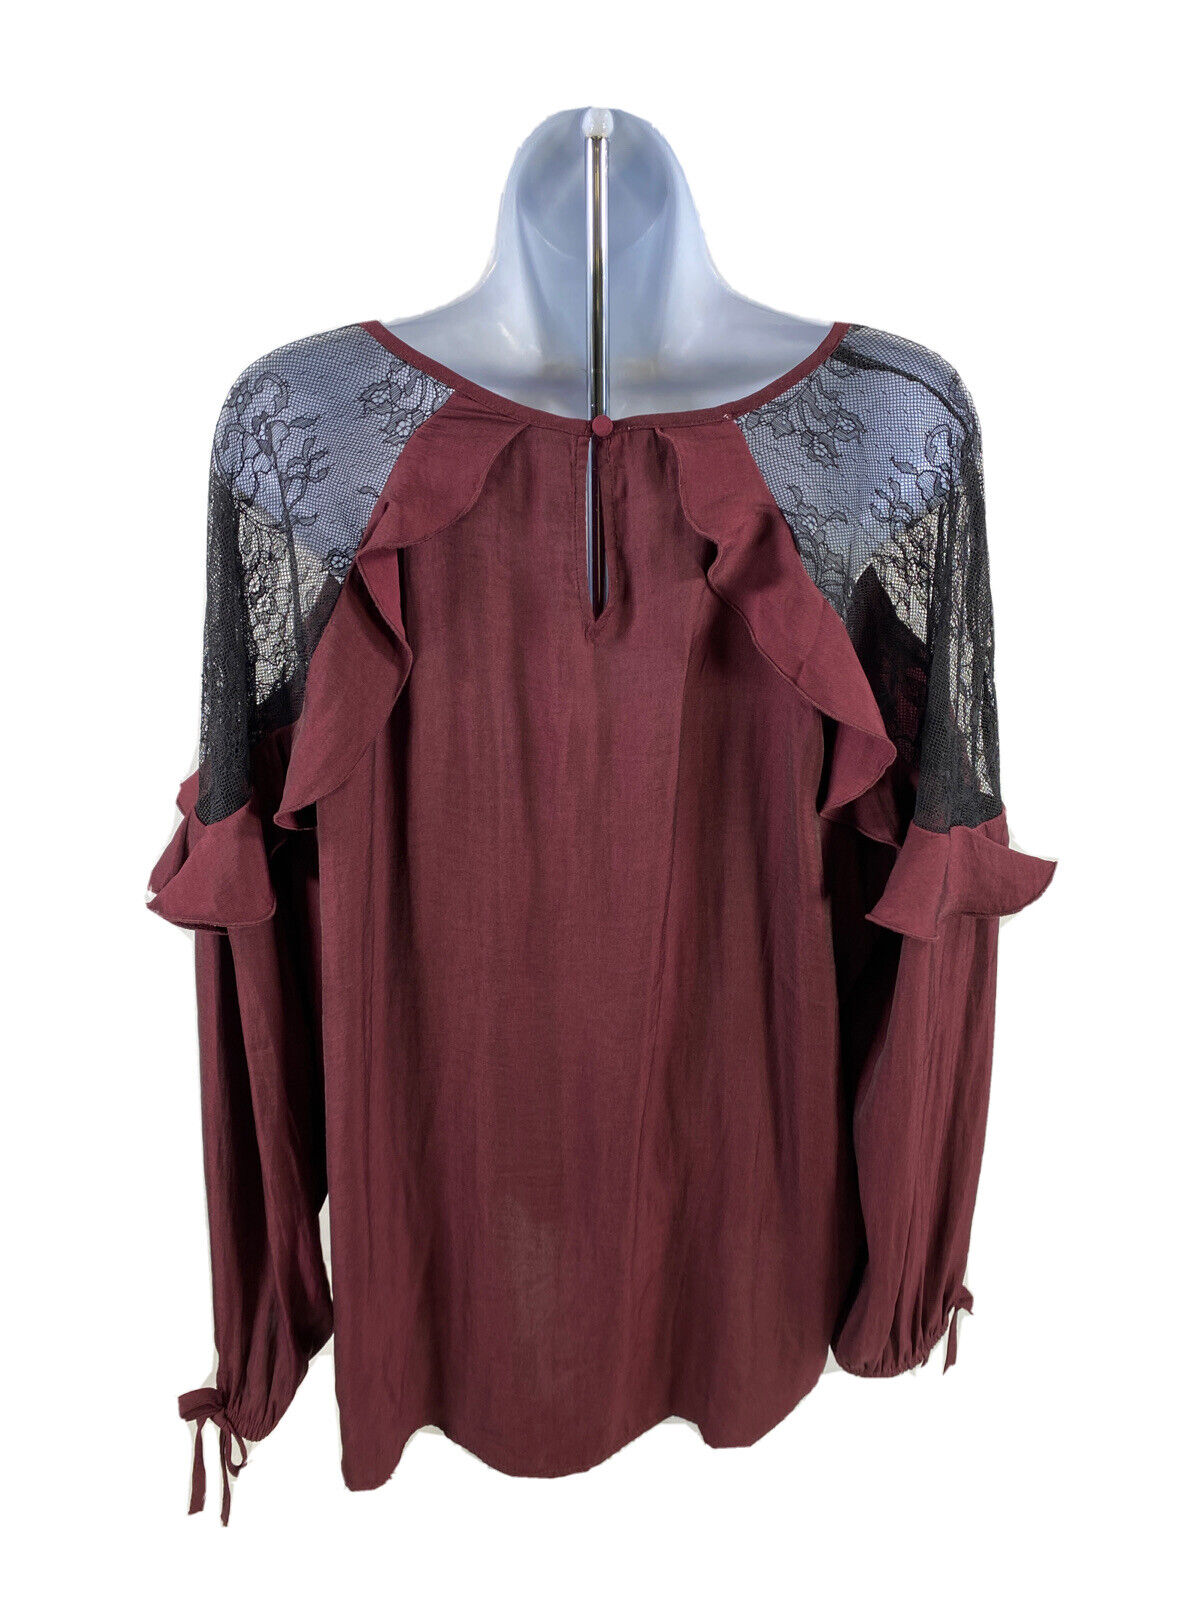 NEW Maurices Womens Dark Red Lace Shoulder Long Sleeve Ruffle Blouse - XL